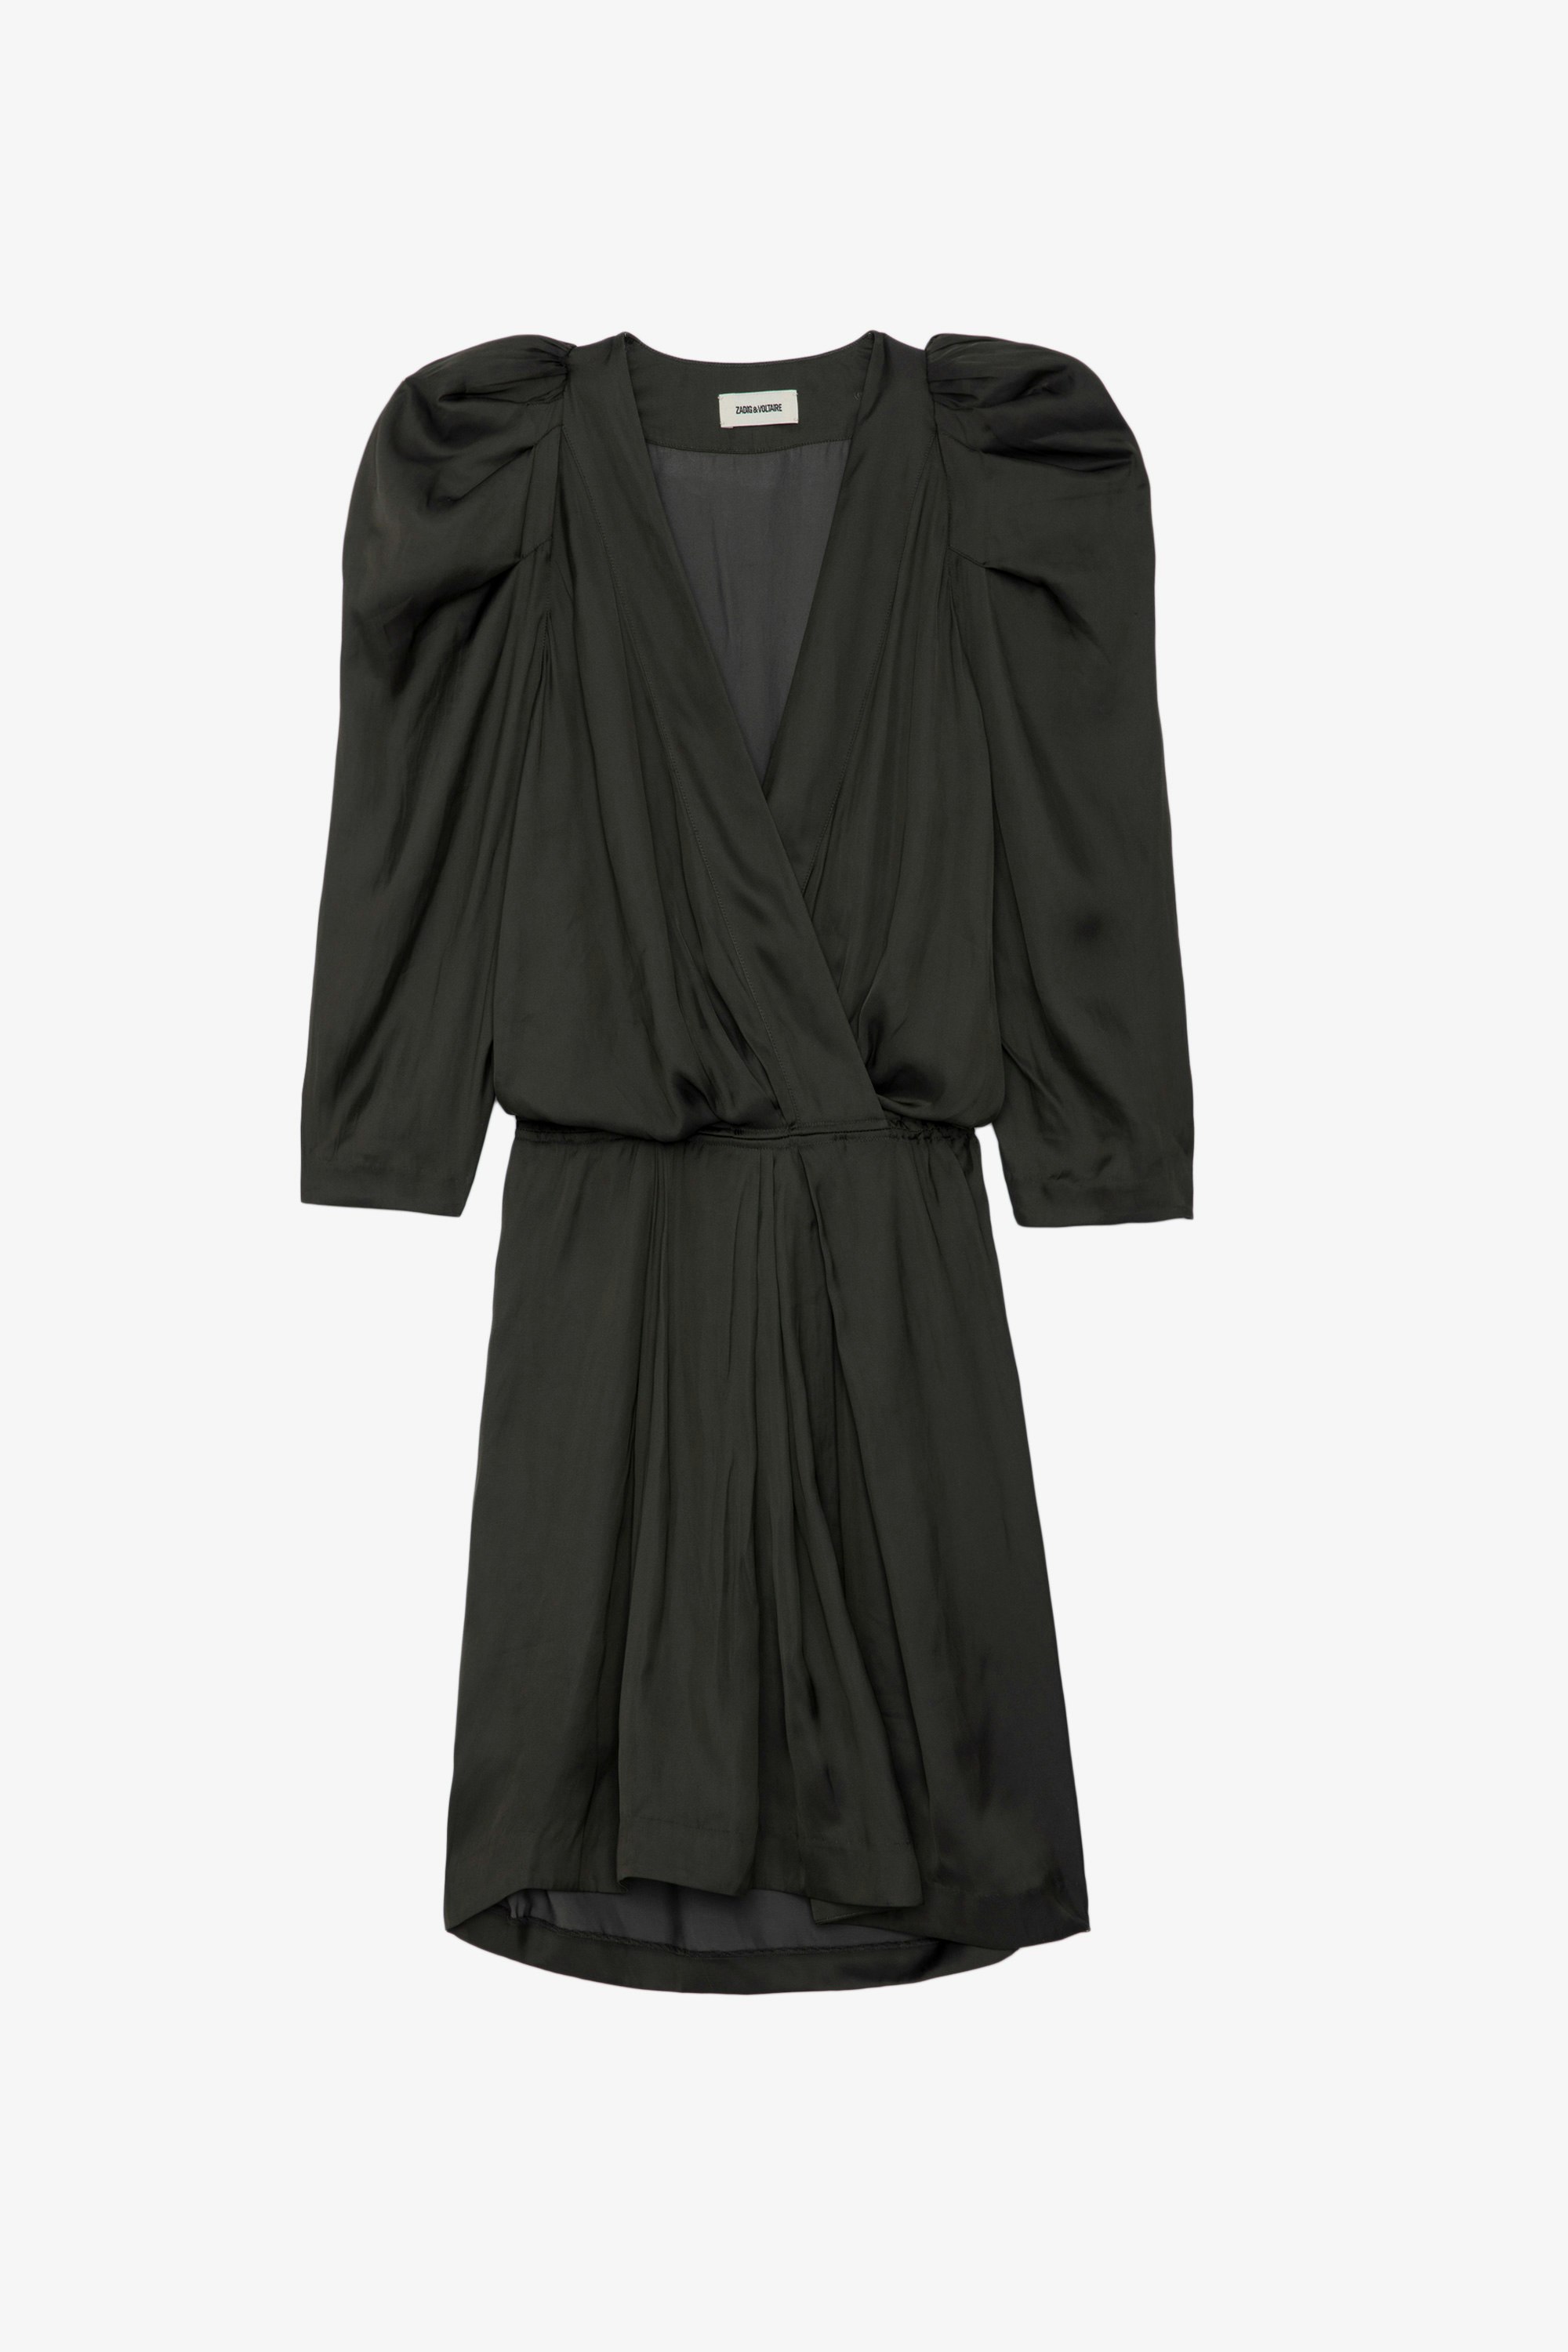 Ruz Satin Dress - Short black satin dress with 3/4-length sleeves, elasticated waist and gathers on the shoulders.